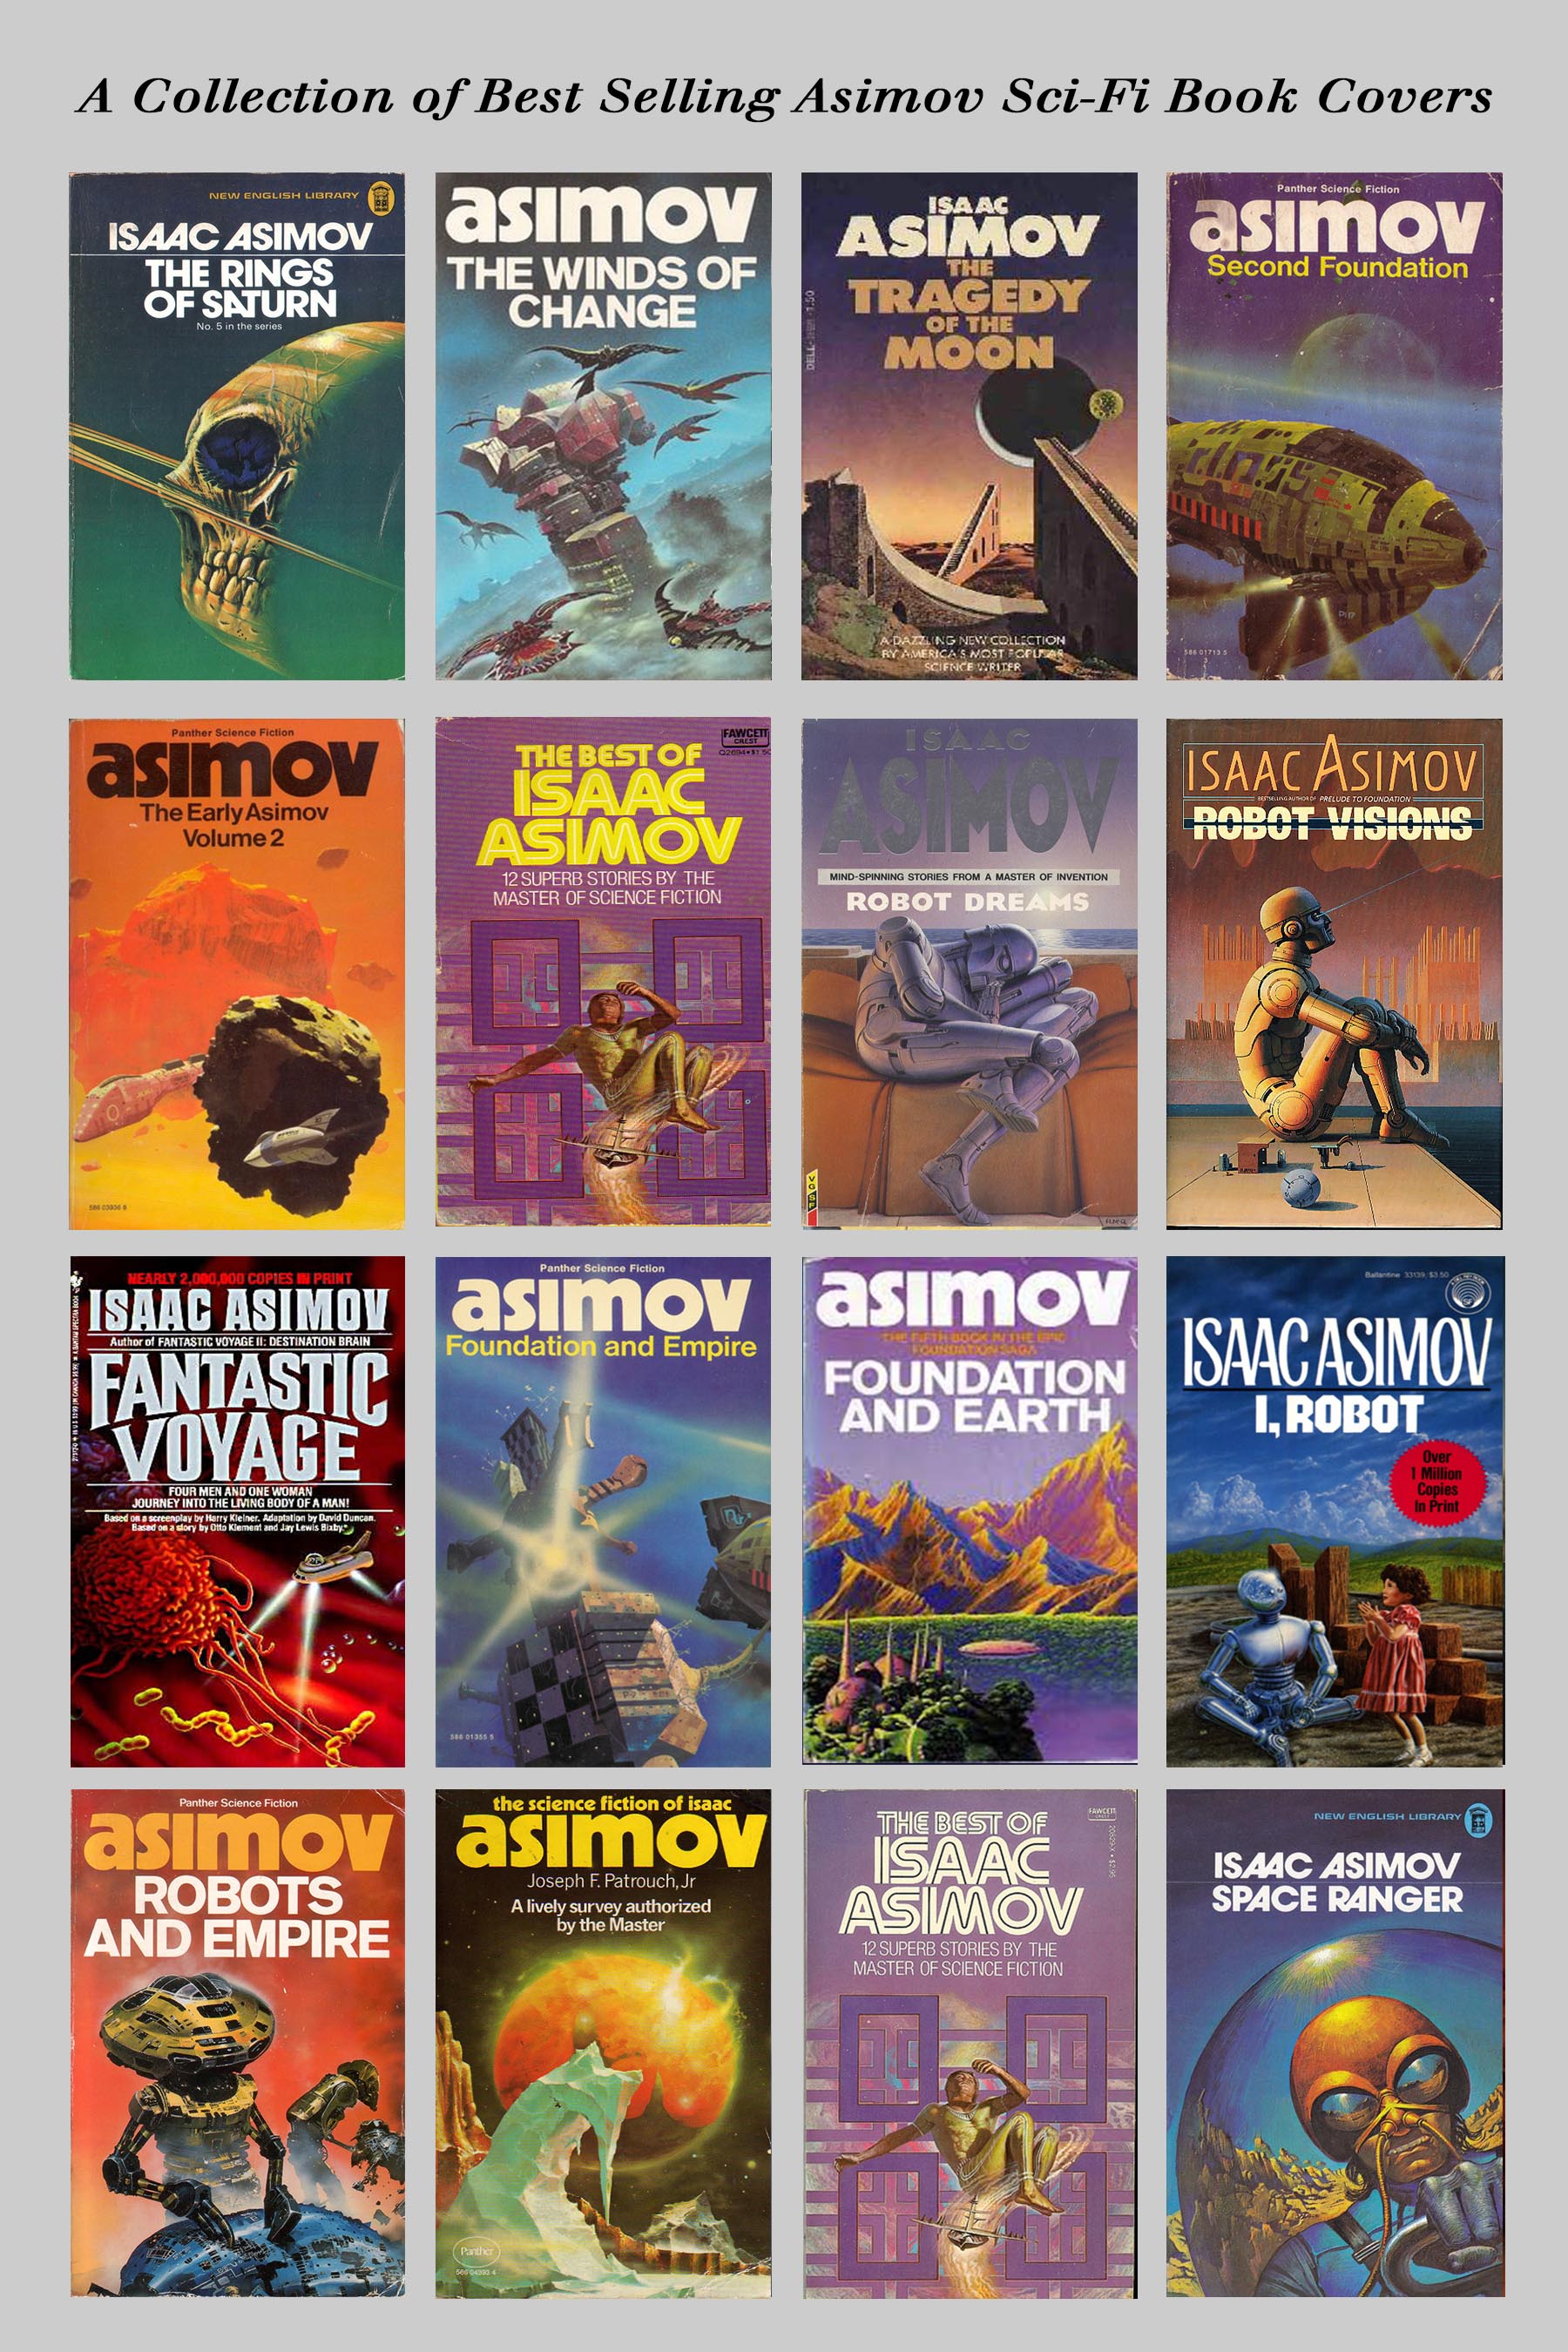 collection of Asimov book covers